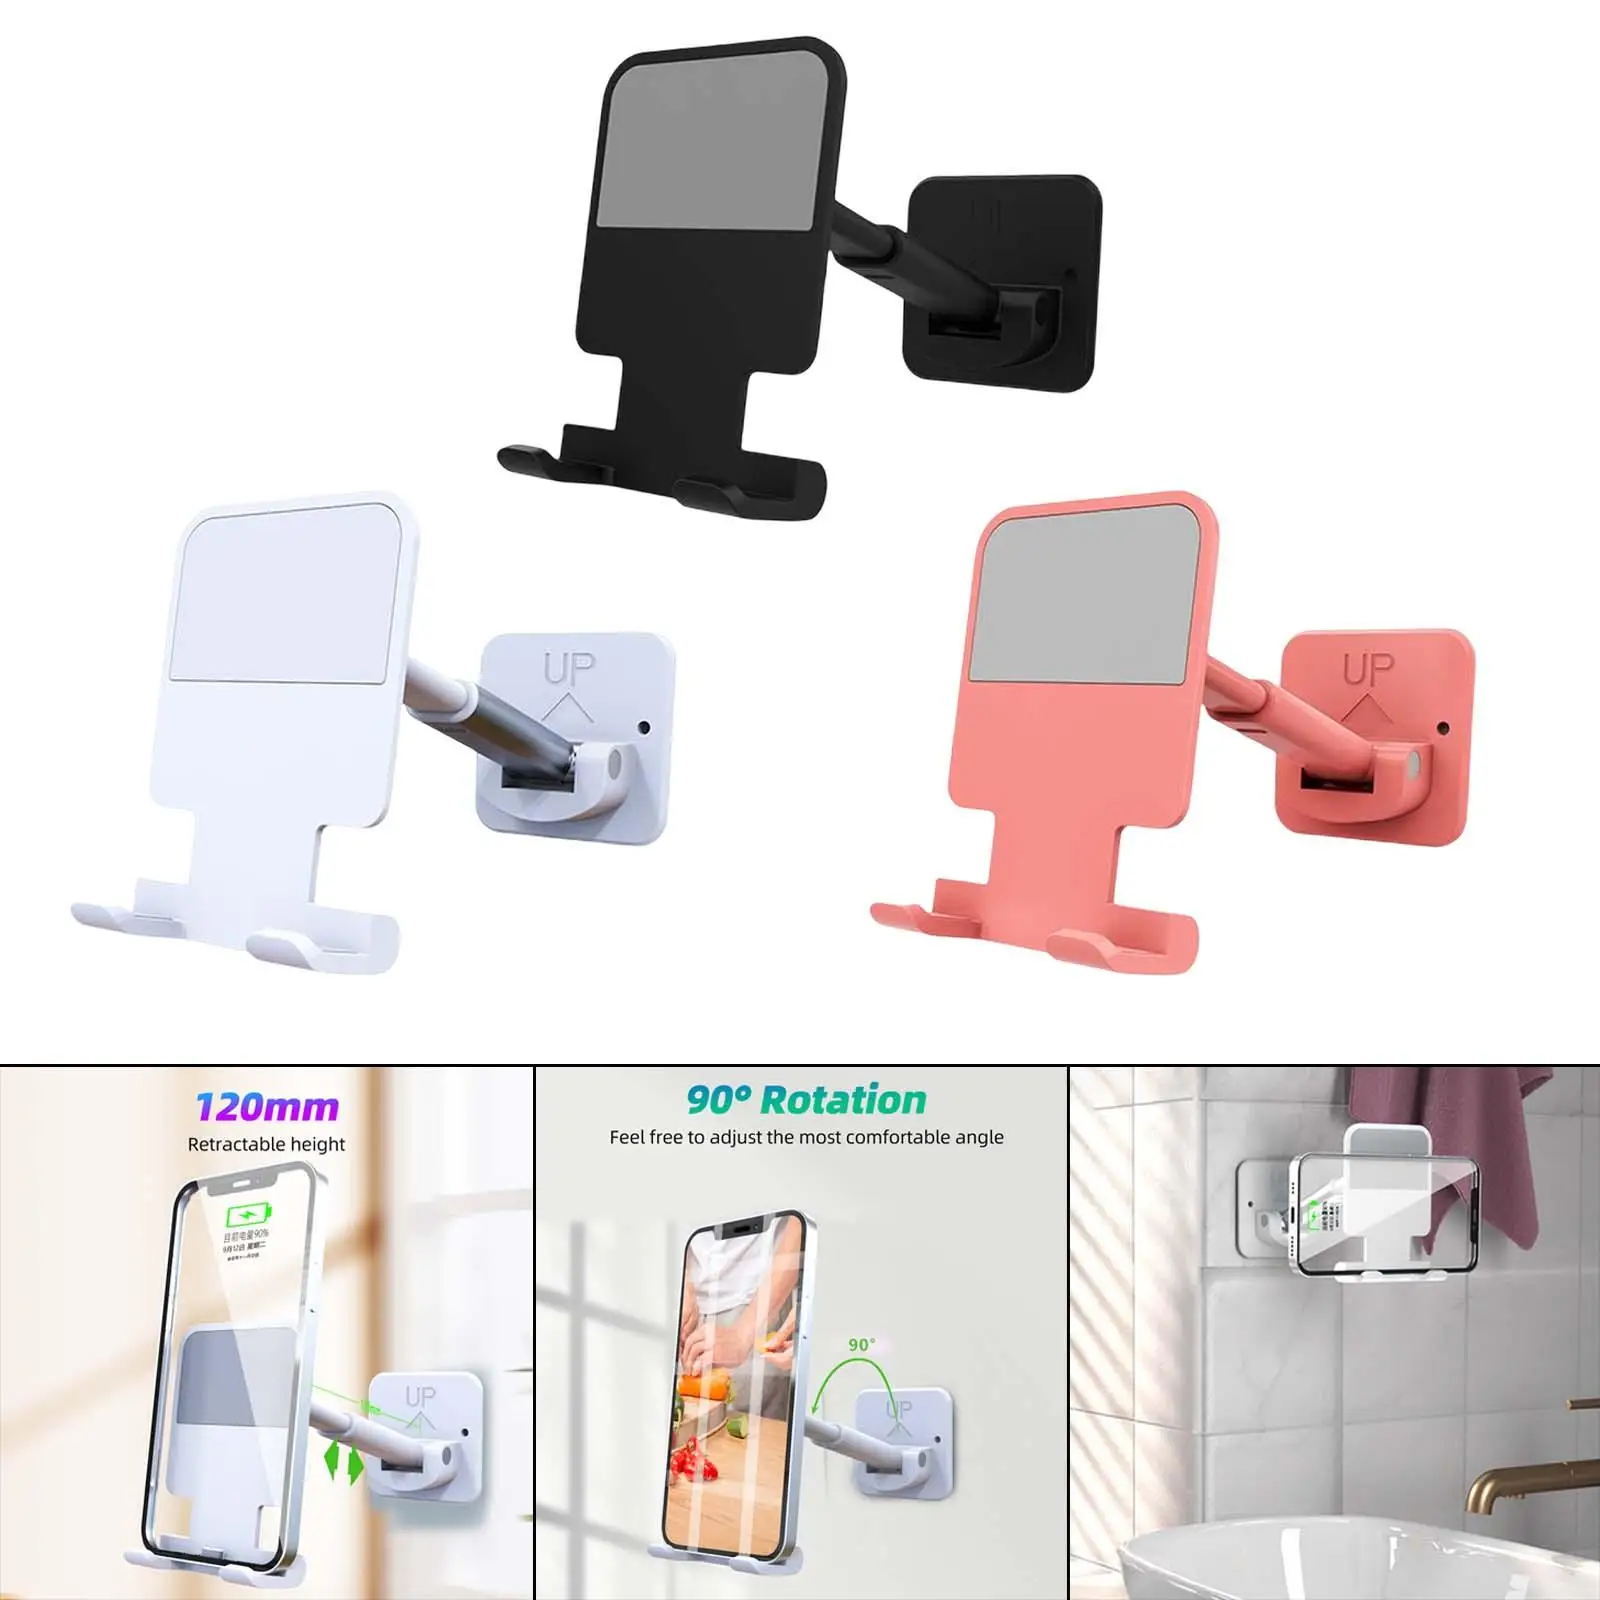 Adhesive Phone Holder Angle Adjustable Cellphone Mounted Phone Mount Bracket for Wall Kitchen Bedroom Bathroom Window